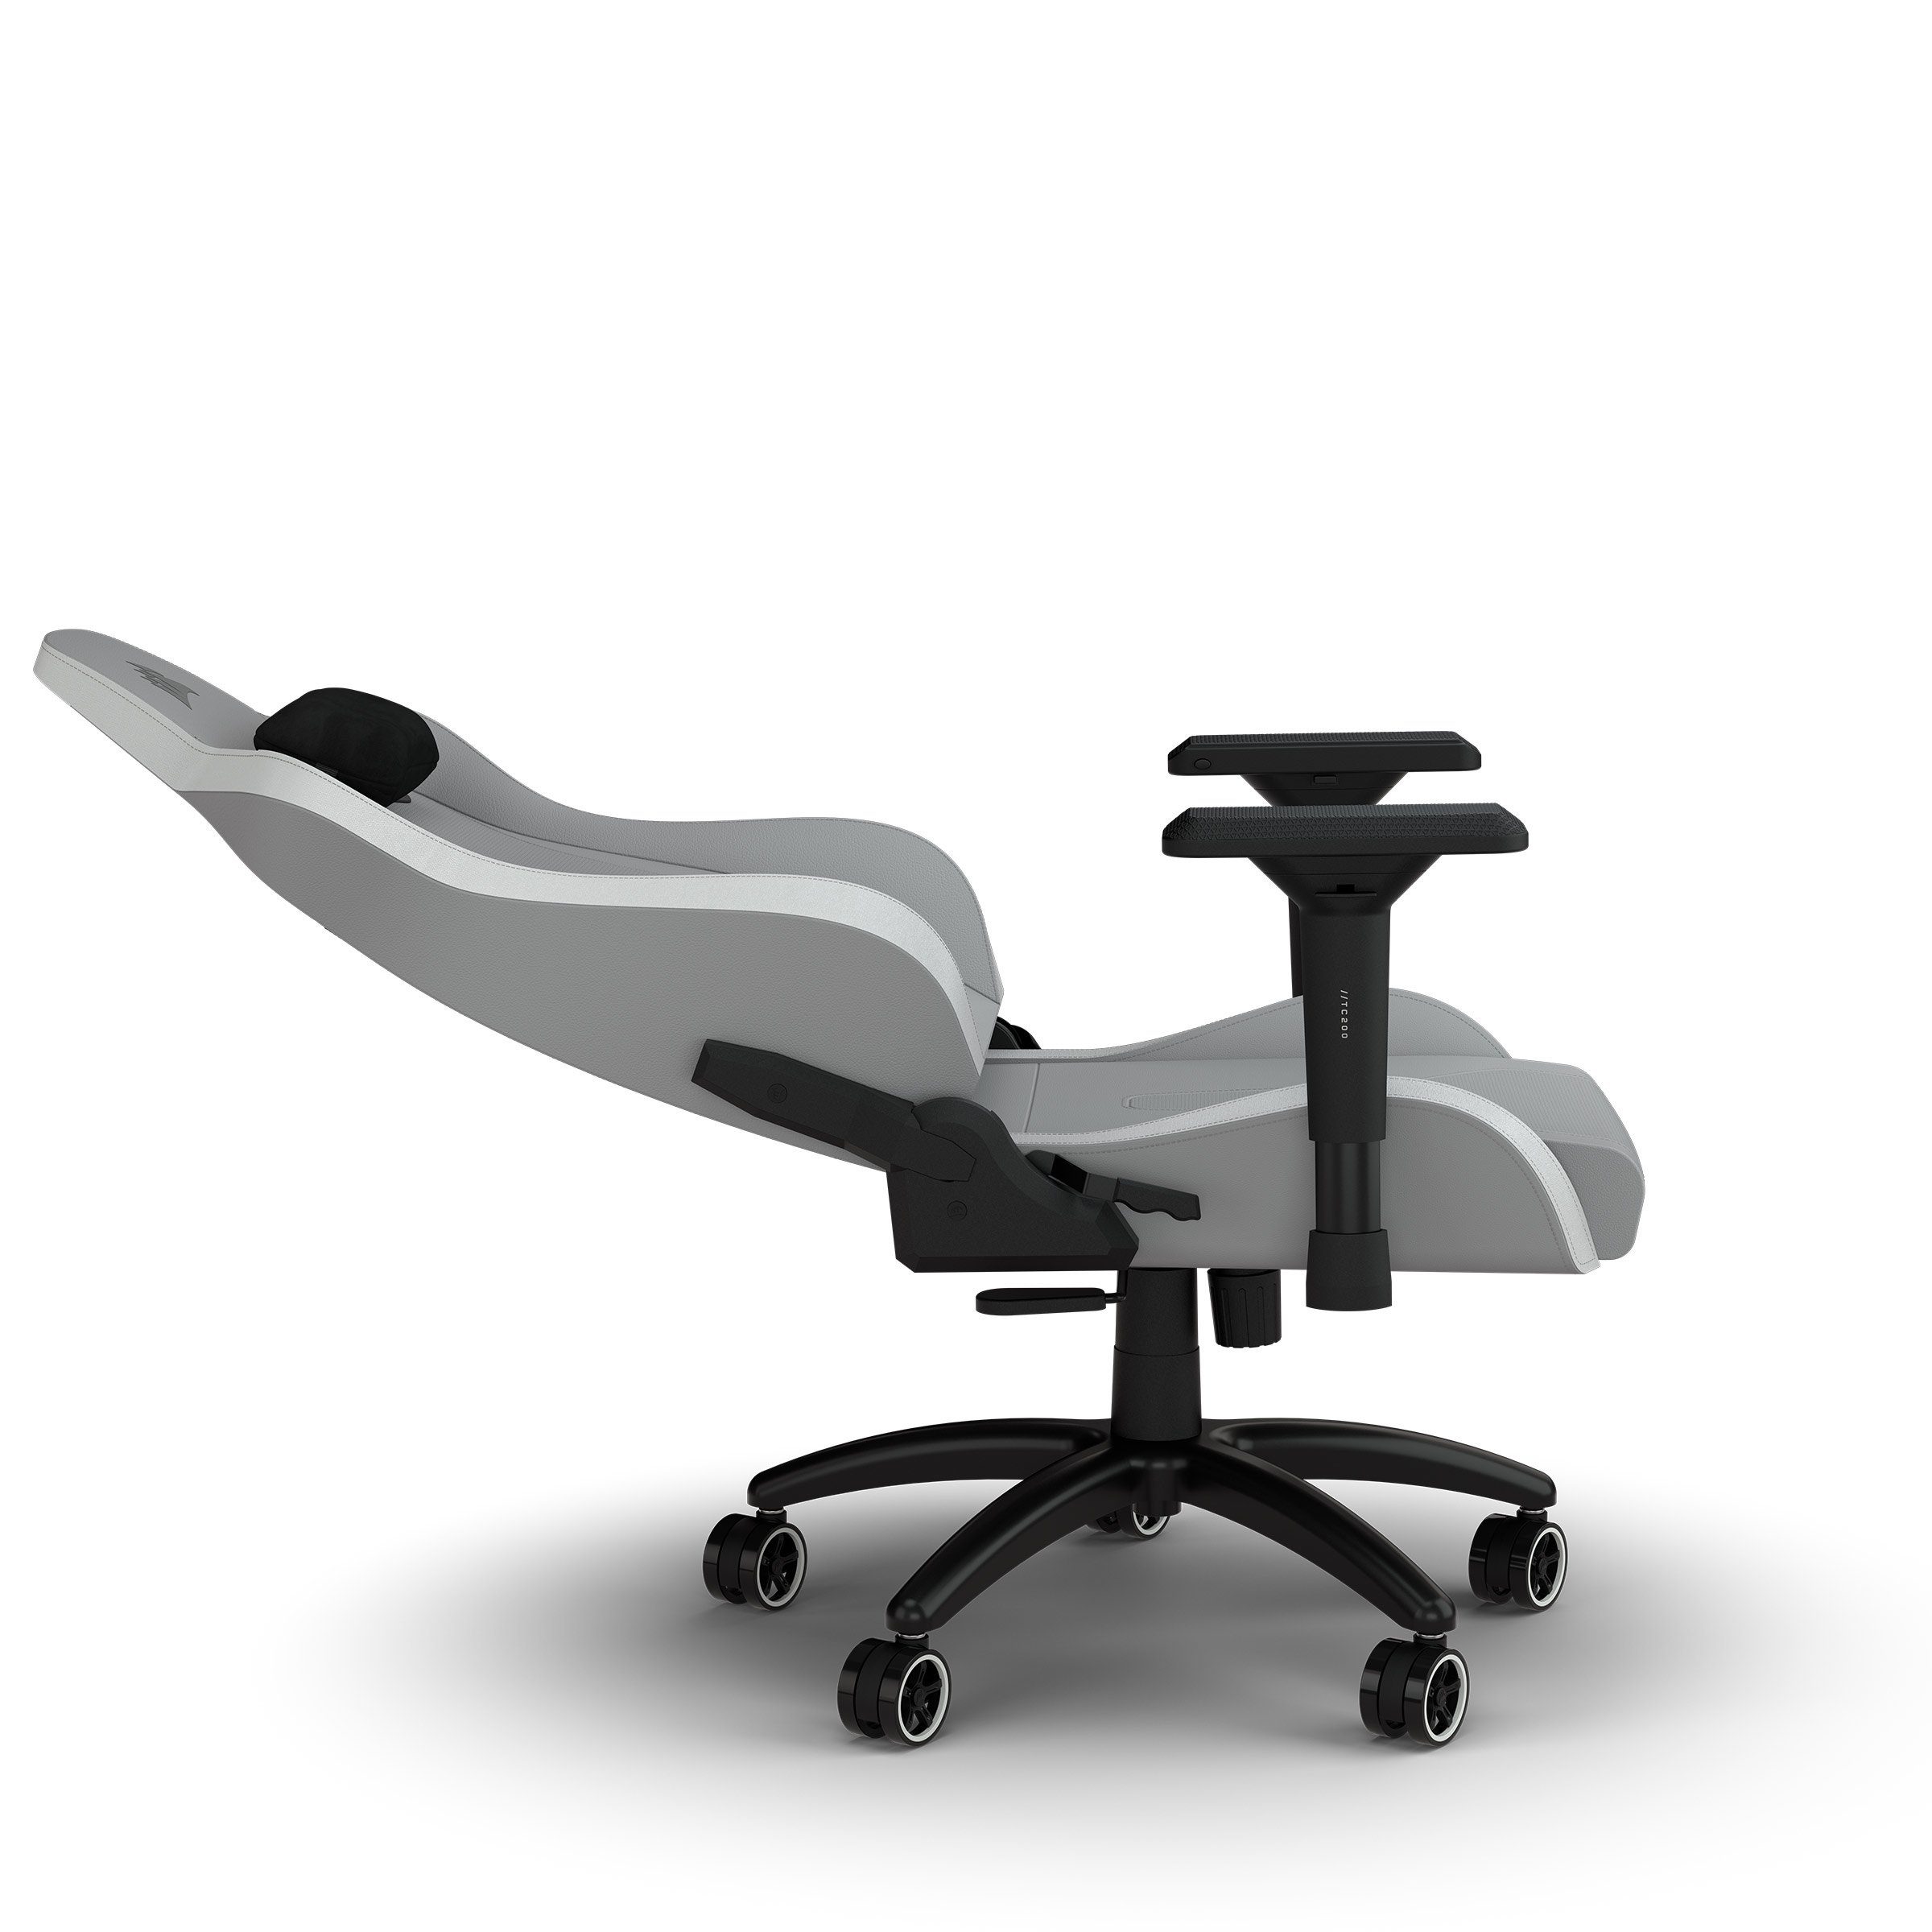 Gaming-Stuhl Fit, Standard Corsair Light Grey/White TC200 Chair, Gaming Leatherette